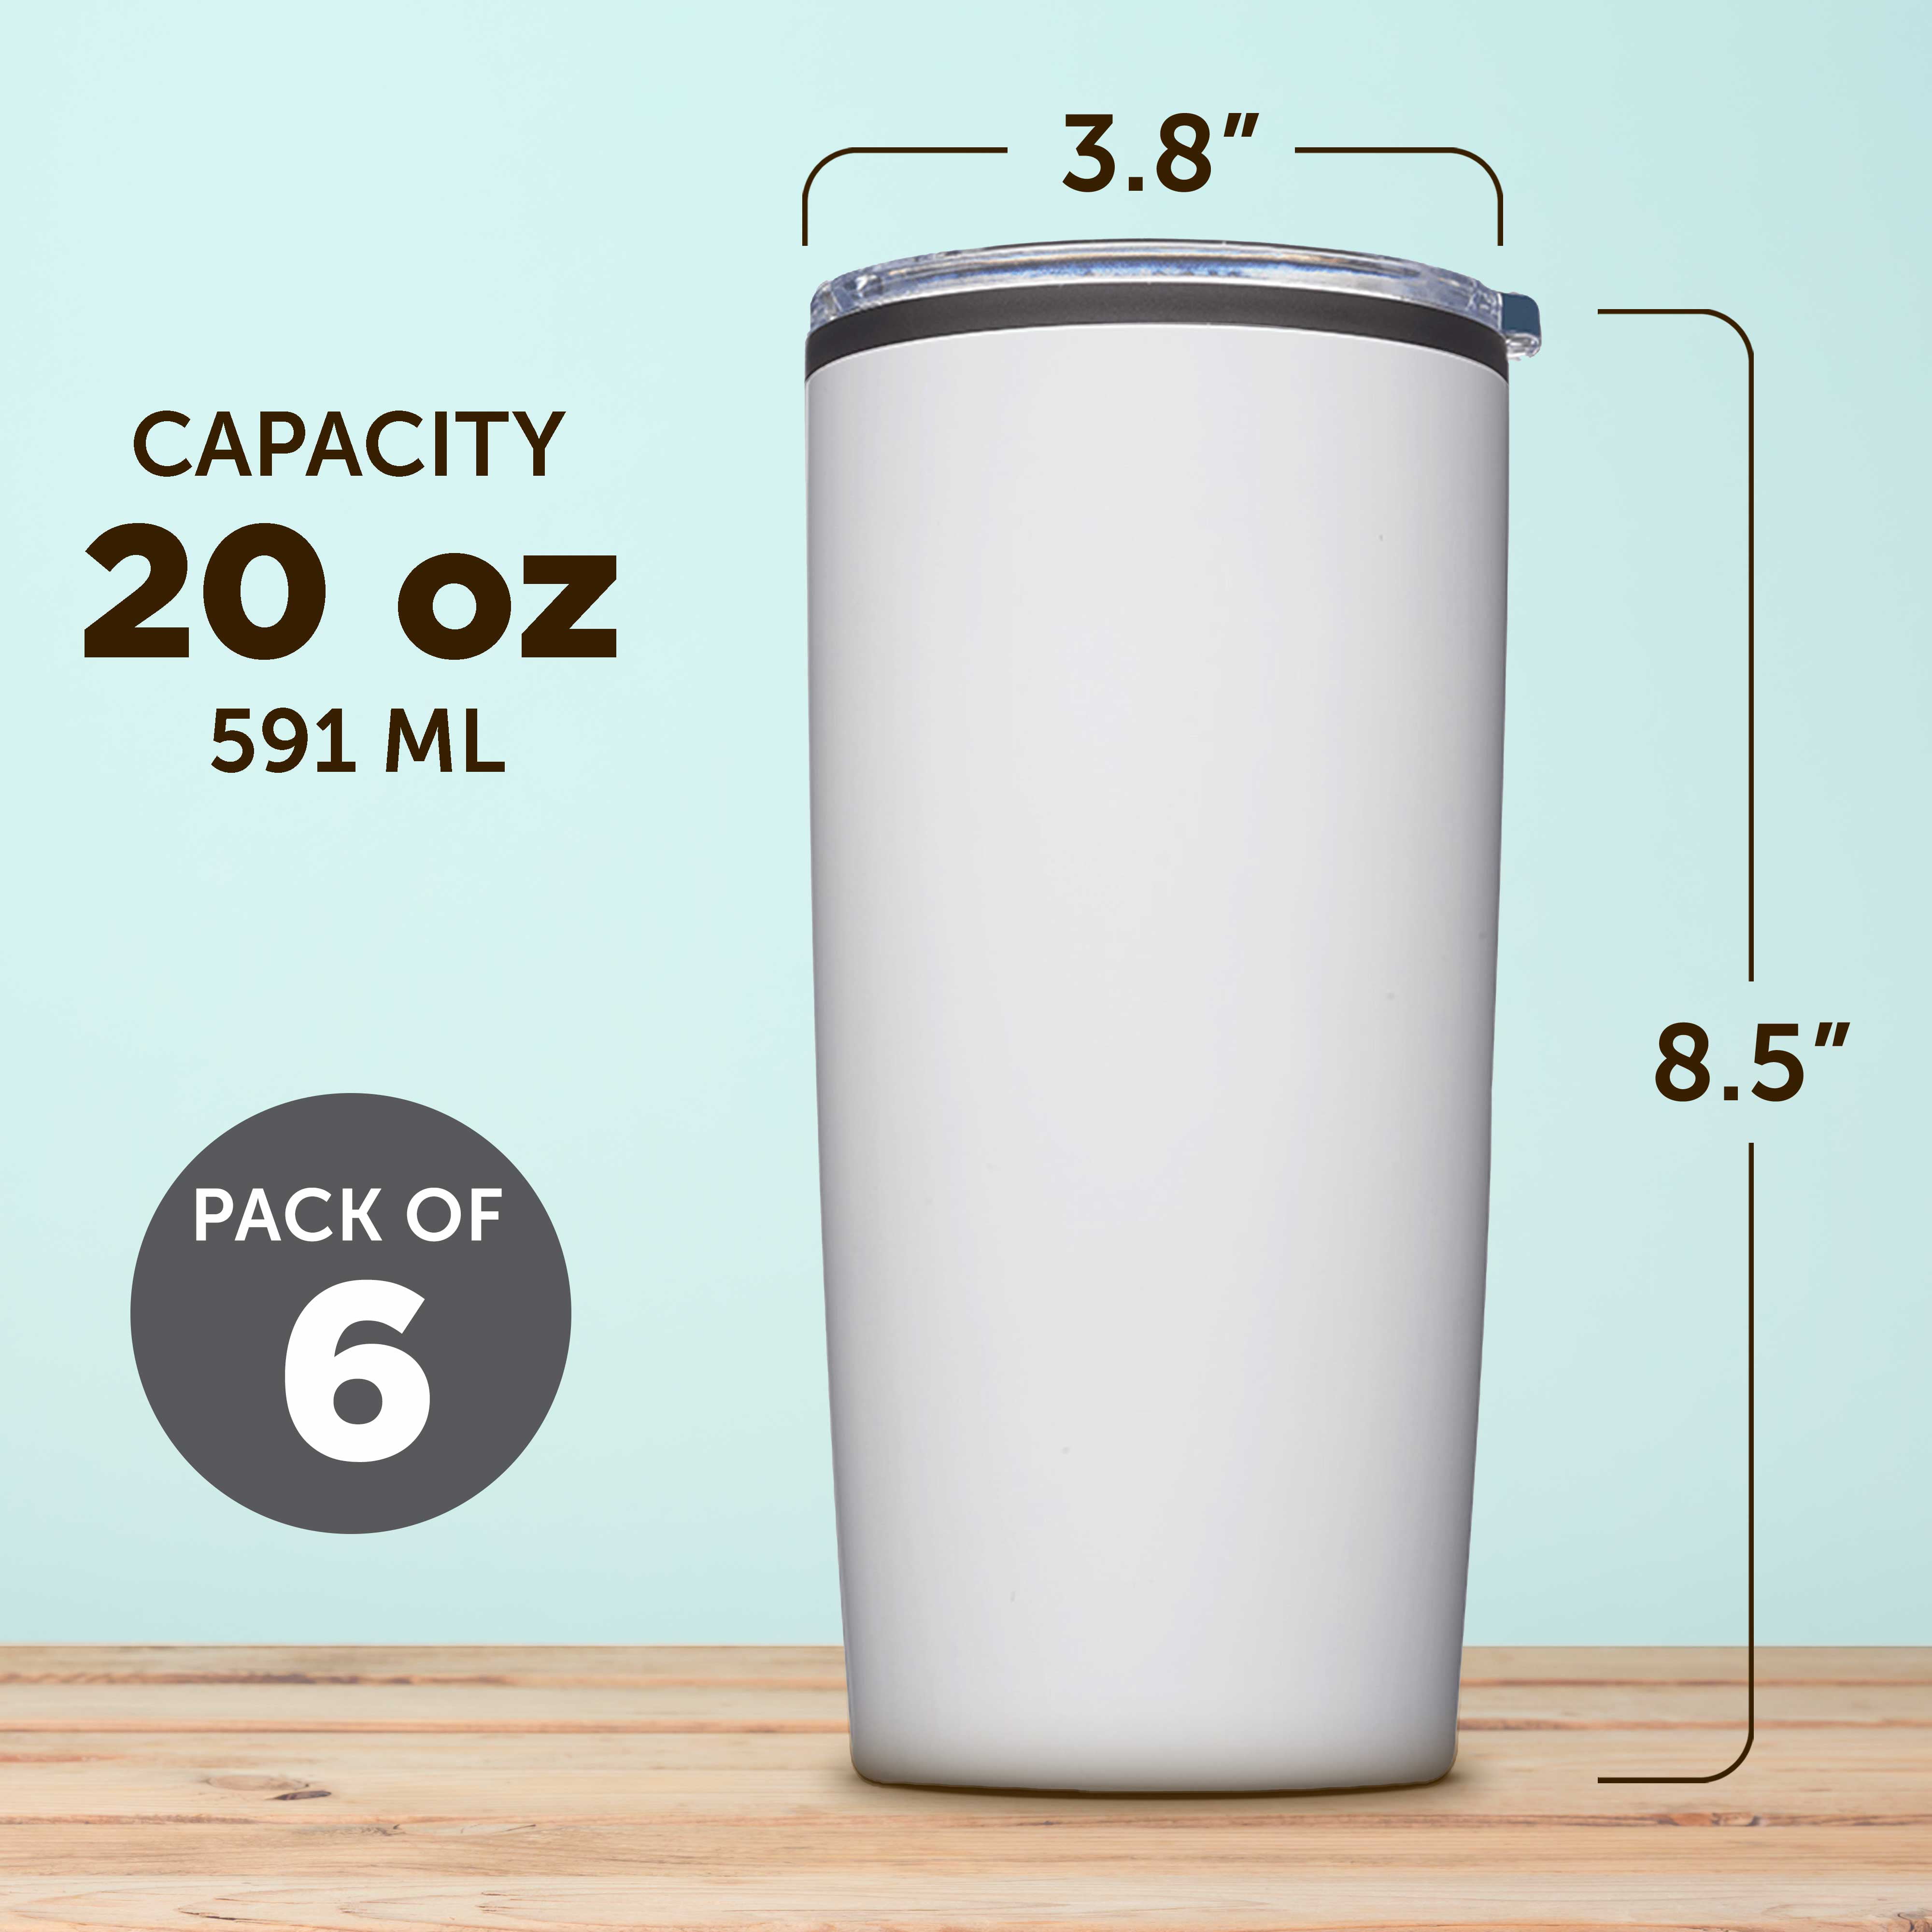 Pixiss Double Wall Tumbler Cups Bulk (6 pack) - 20 oz Stainless Steel Hot  and Cold Tumbler 6 Reusabl…See more Pixiss Double Wall Tumbler Cups Bulk (6